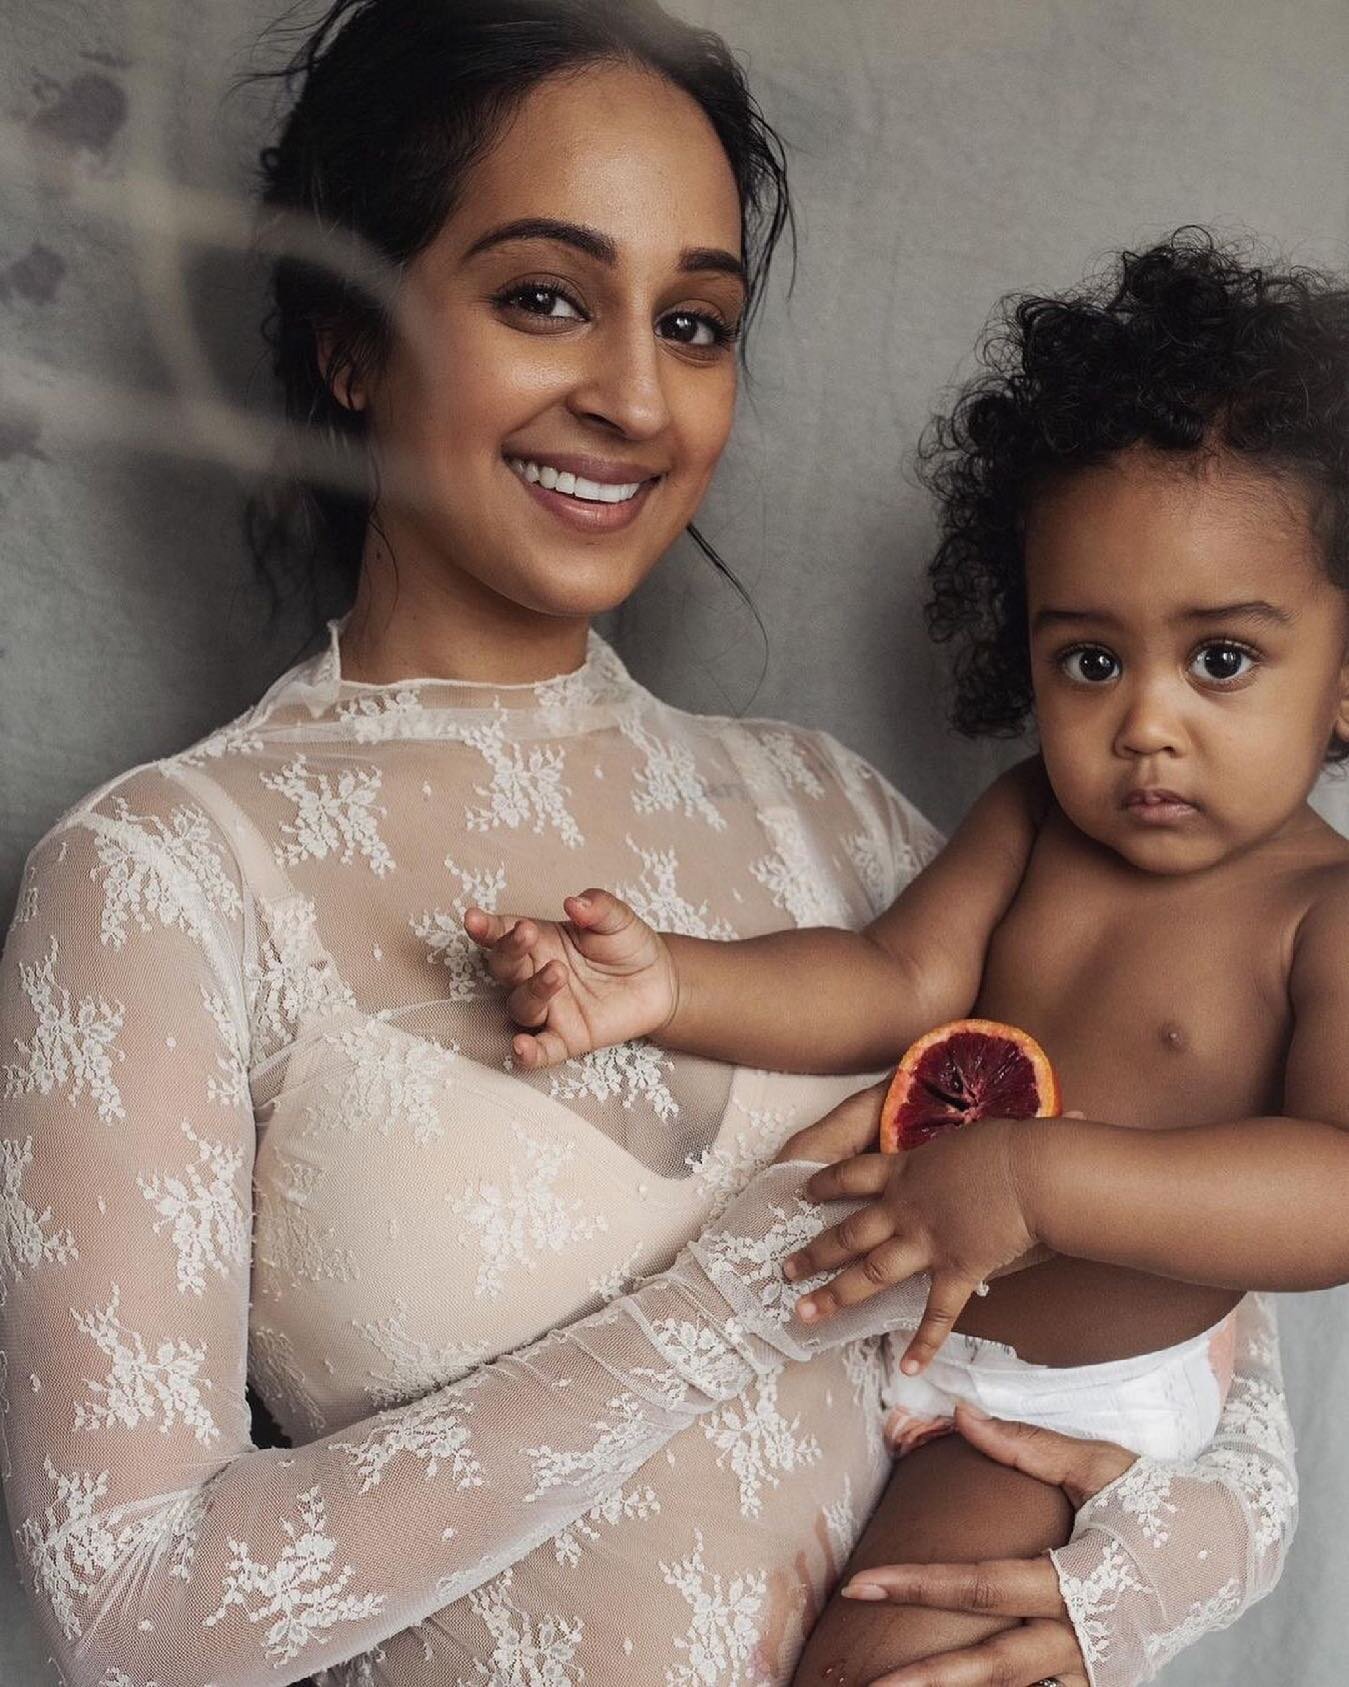 &ldquo;In Indian &amp; Congolese (my daughter is half of both) culture, it&rsquo;s nothing new to feed your baby whatever the rest of the family is having. You&rsquo;ll see a baby eating roti dipped in curried lentils or plantains and foufou. When Ha